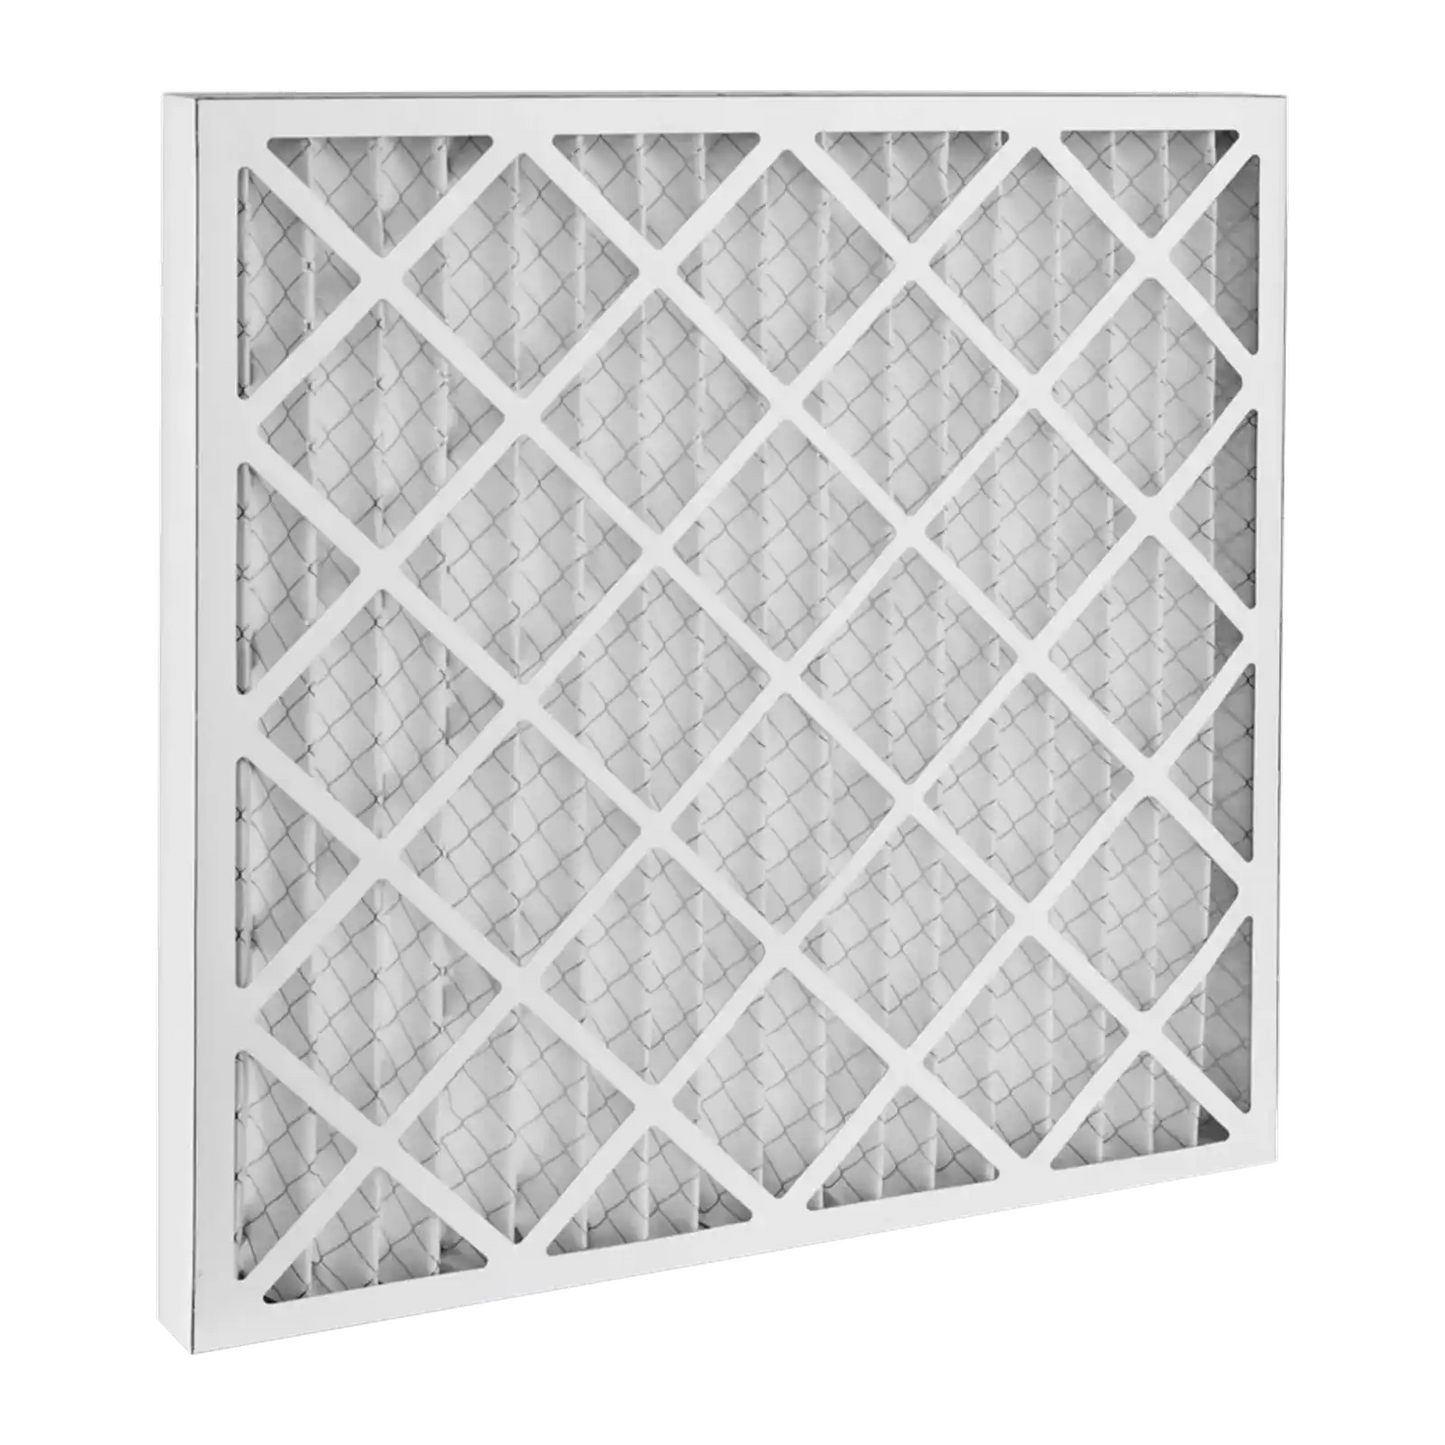 Dafco 10x10x1 Furnace AC Filter - Case of 12